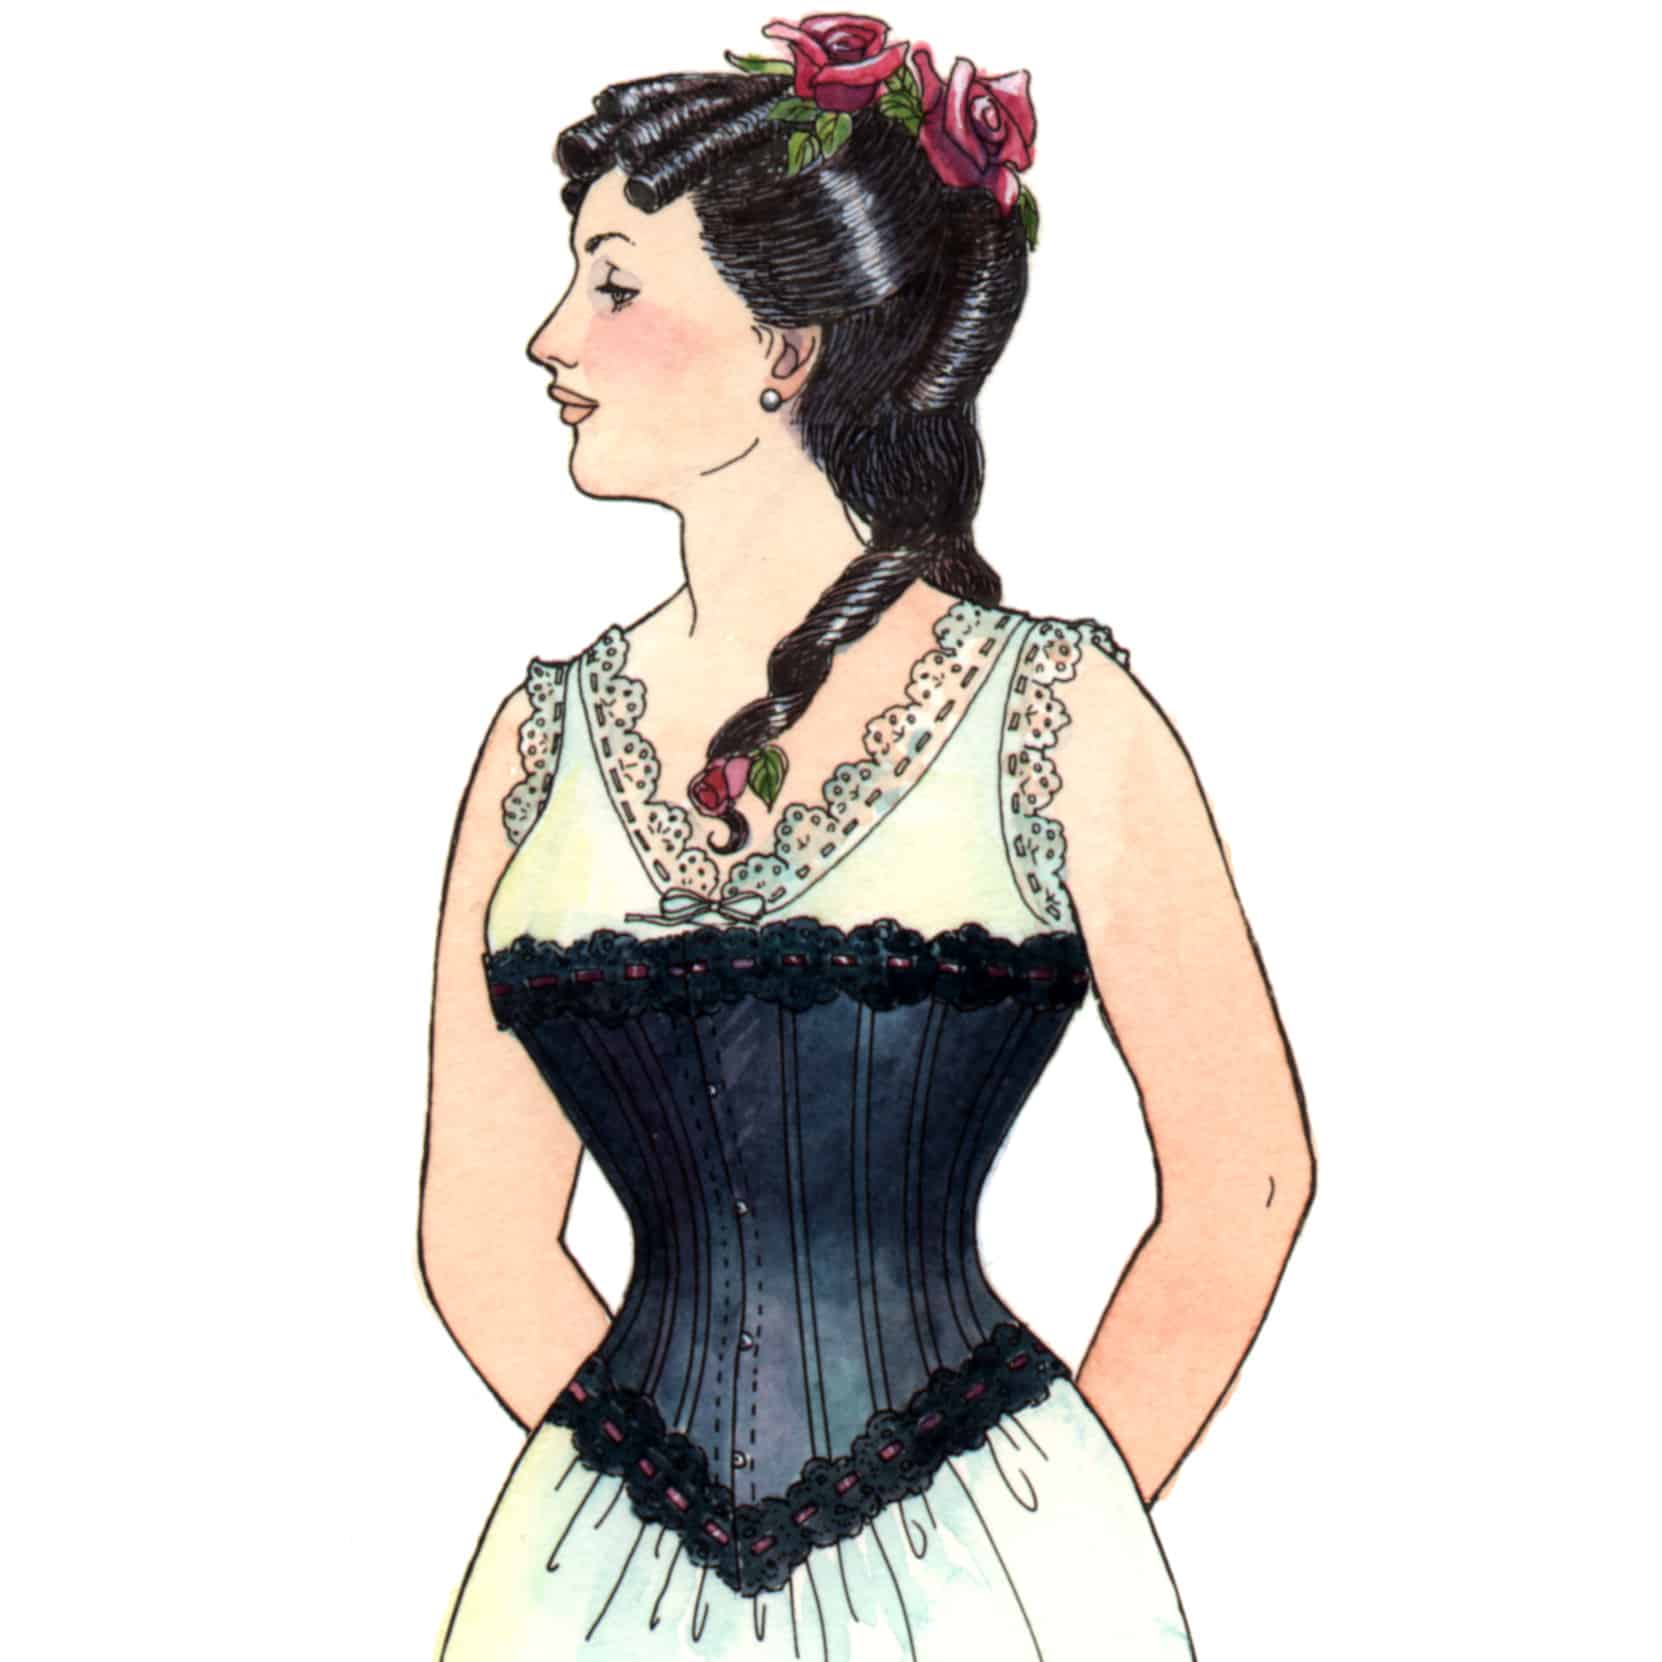 Sewing a Victorian Inspired Corset, Corset sewing pattern